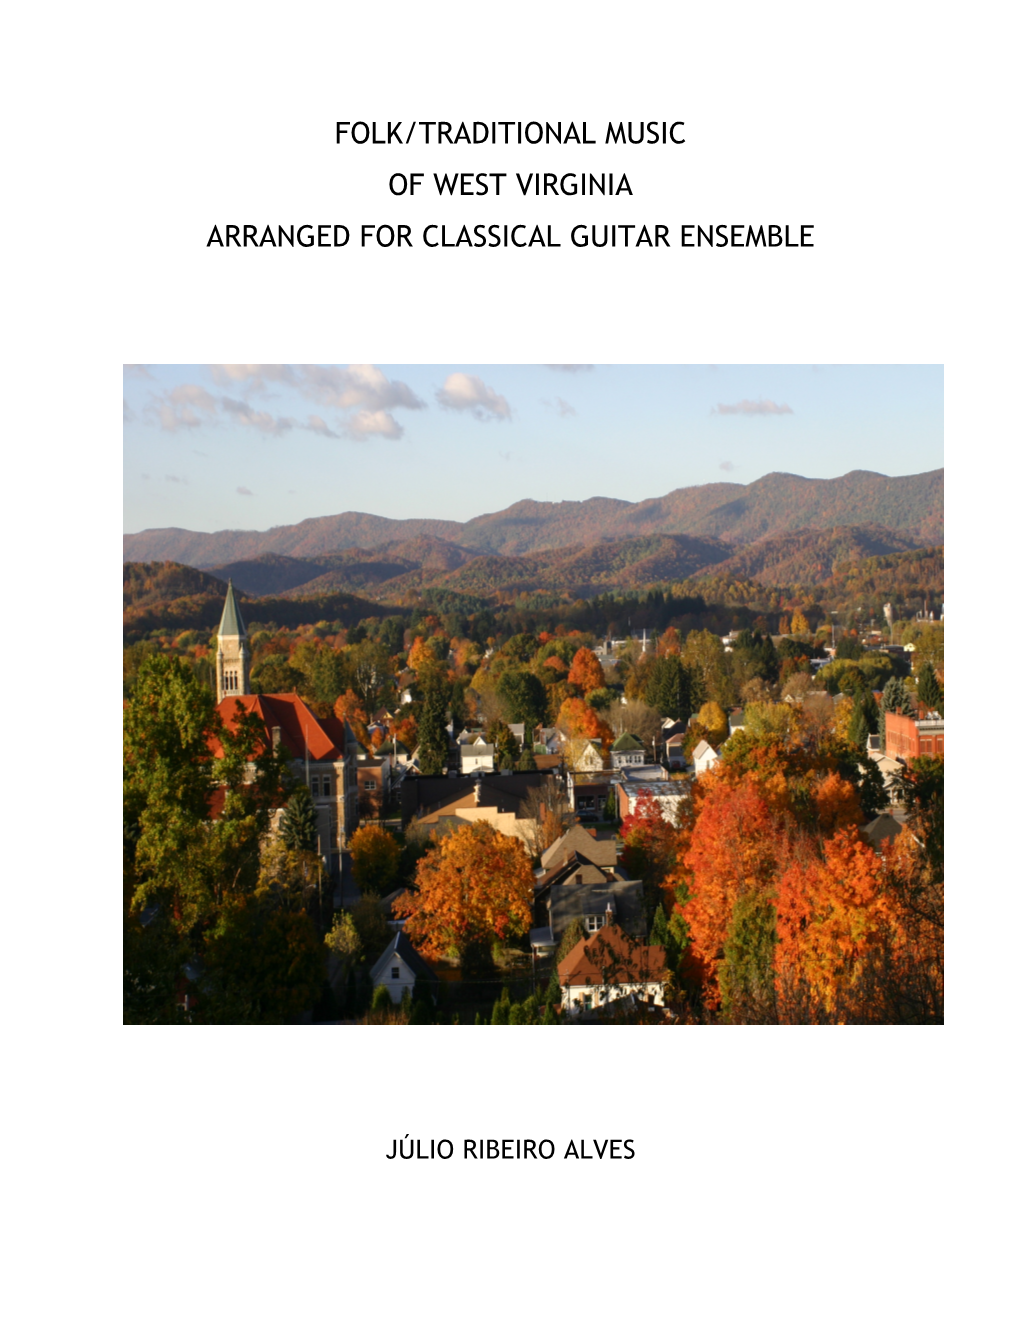 Folk/Traditional Music of West Virginia Arranged for Classical Guitar Ensemble